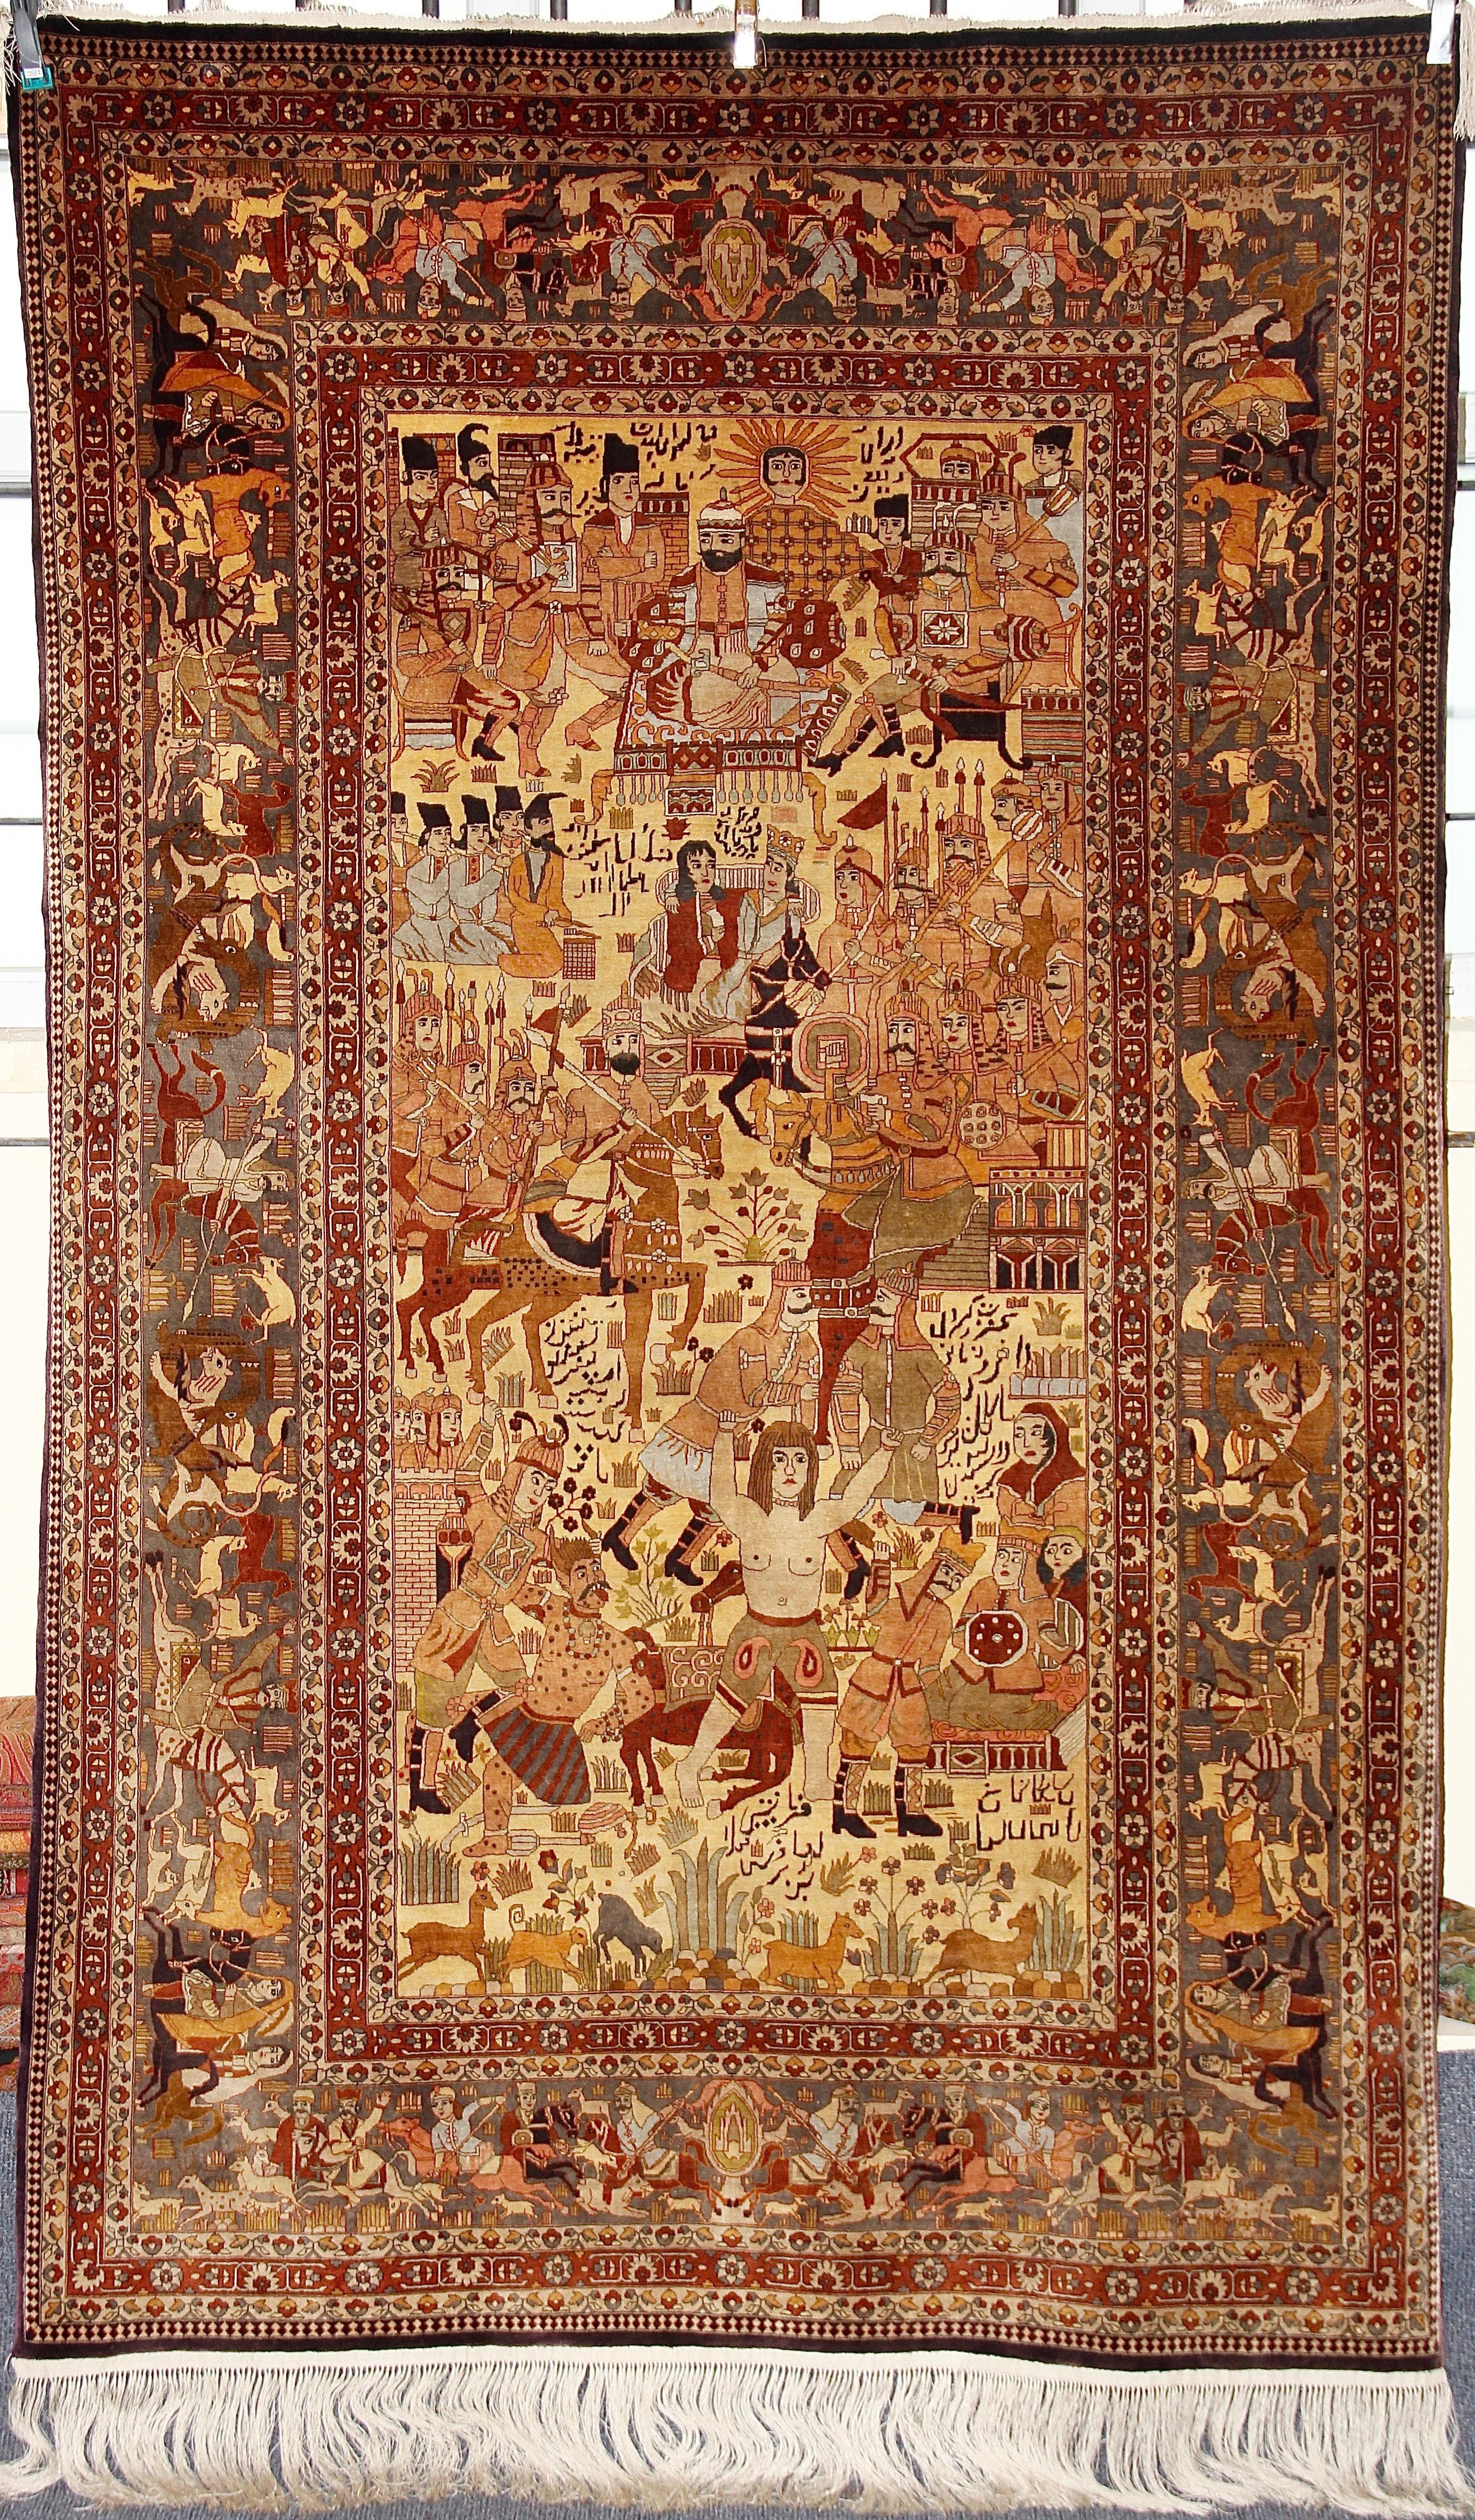 Beautiful and very decorative Pictorial rug (tapestry).
Very fine hand knot.
Illustration of a royal wedding celebration with
Bridal couple, soldiers, generals, poets, musicians, belly dancers, animals and mythical creatures.

Such carpets are